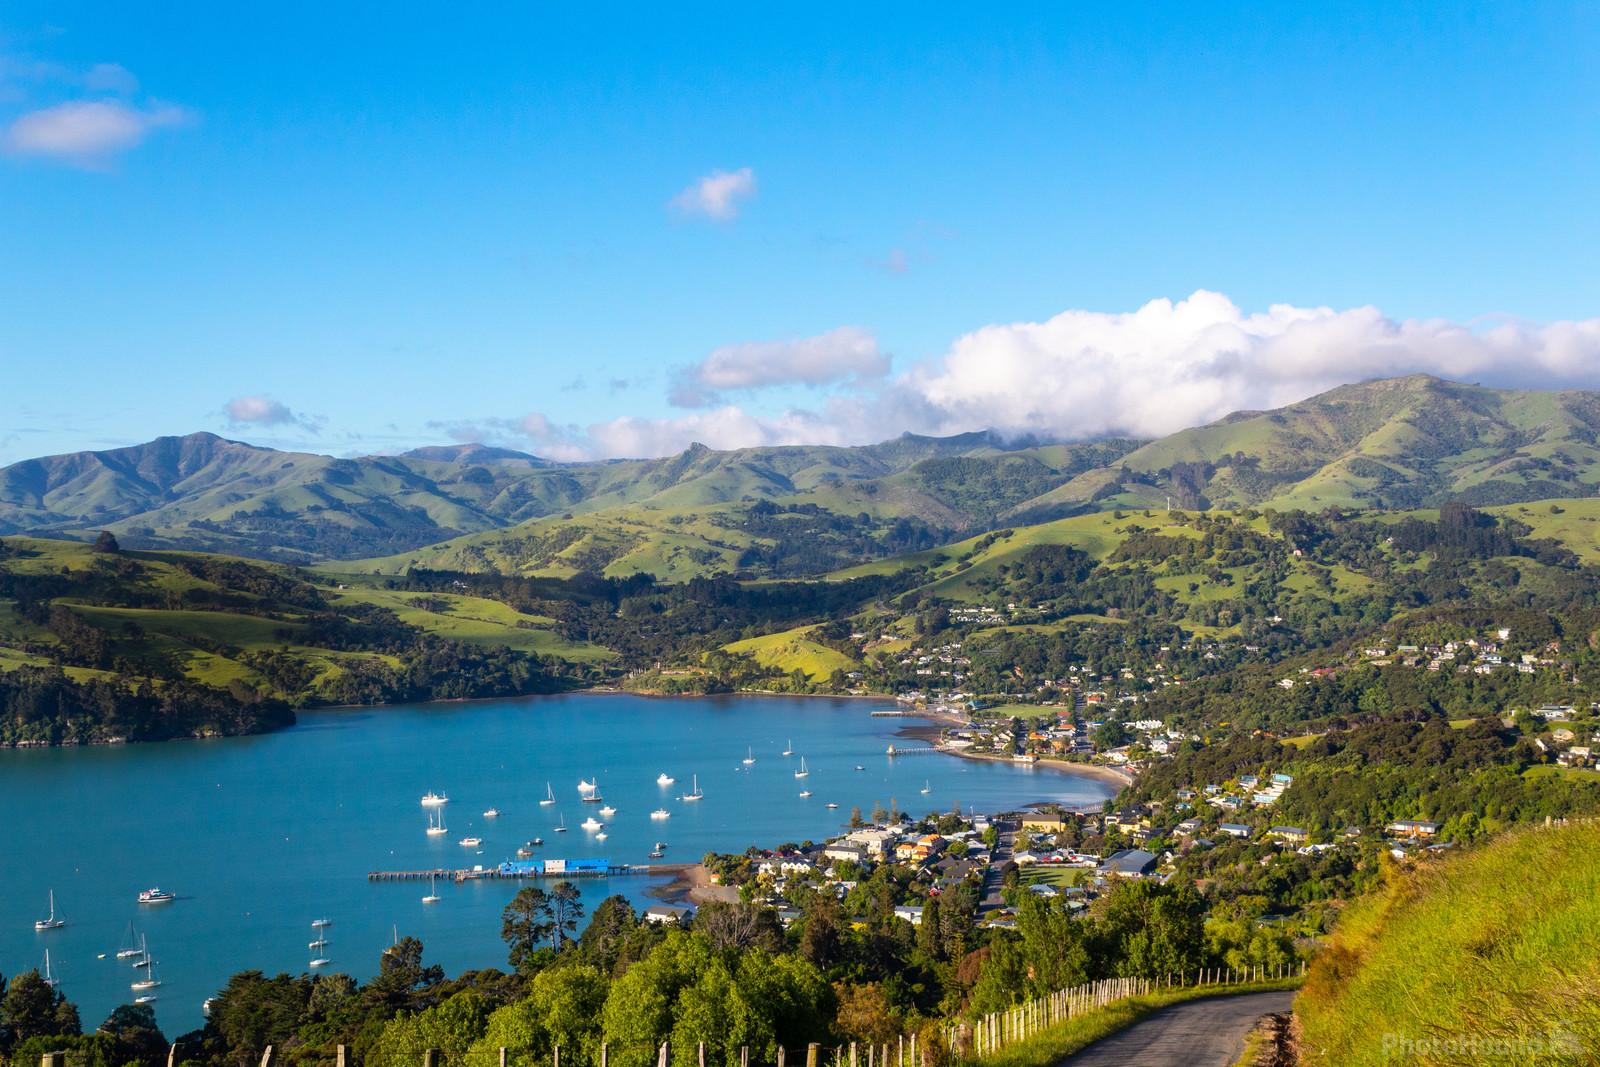 Image of Akaroa Scenic Viewpoint by Myriam M.